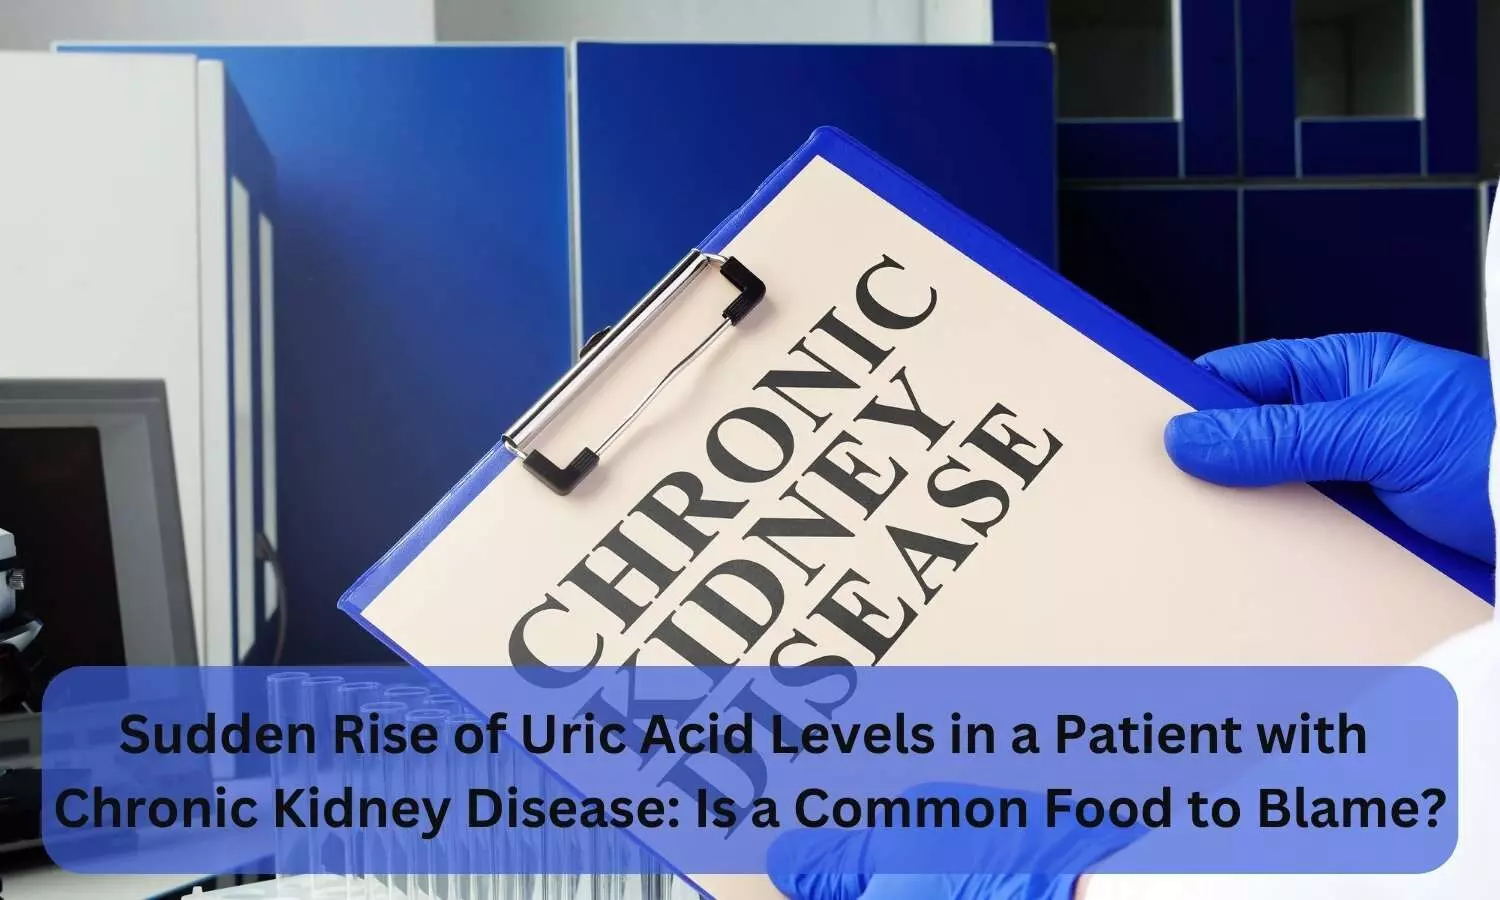 Sudden Rise of Uric Acid Levels in a Patient with Chronic Kidney Disease: Is a Common Food to Blame?